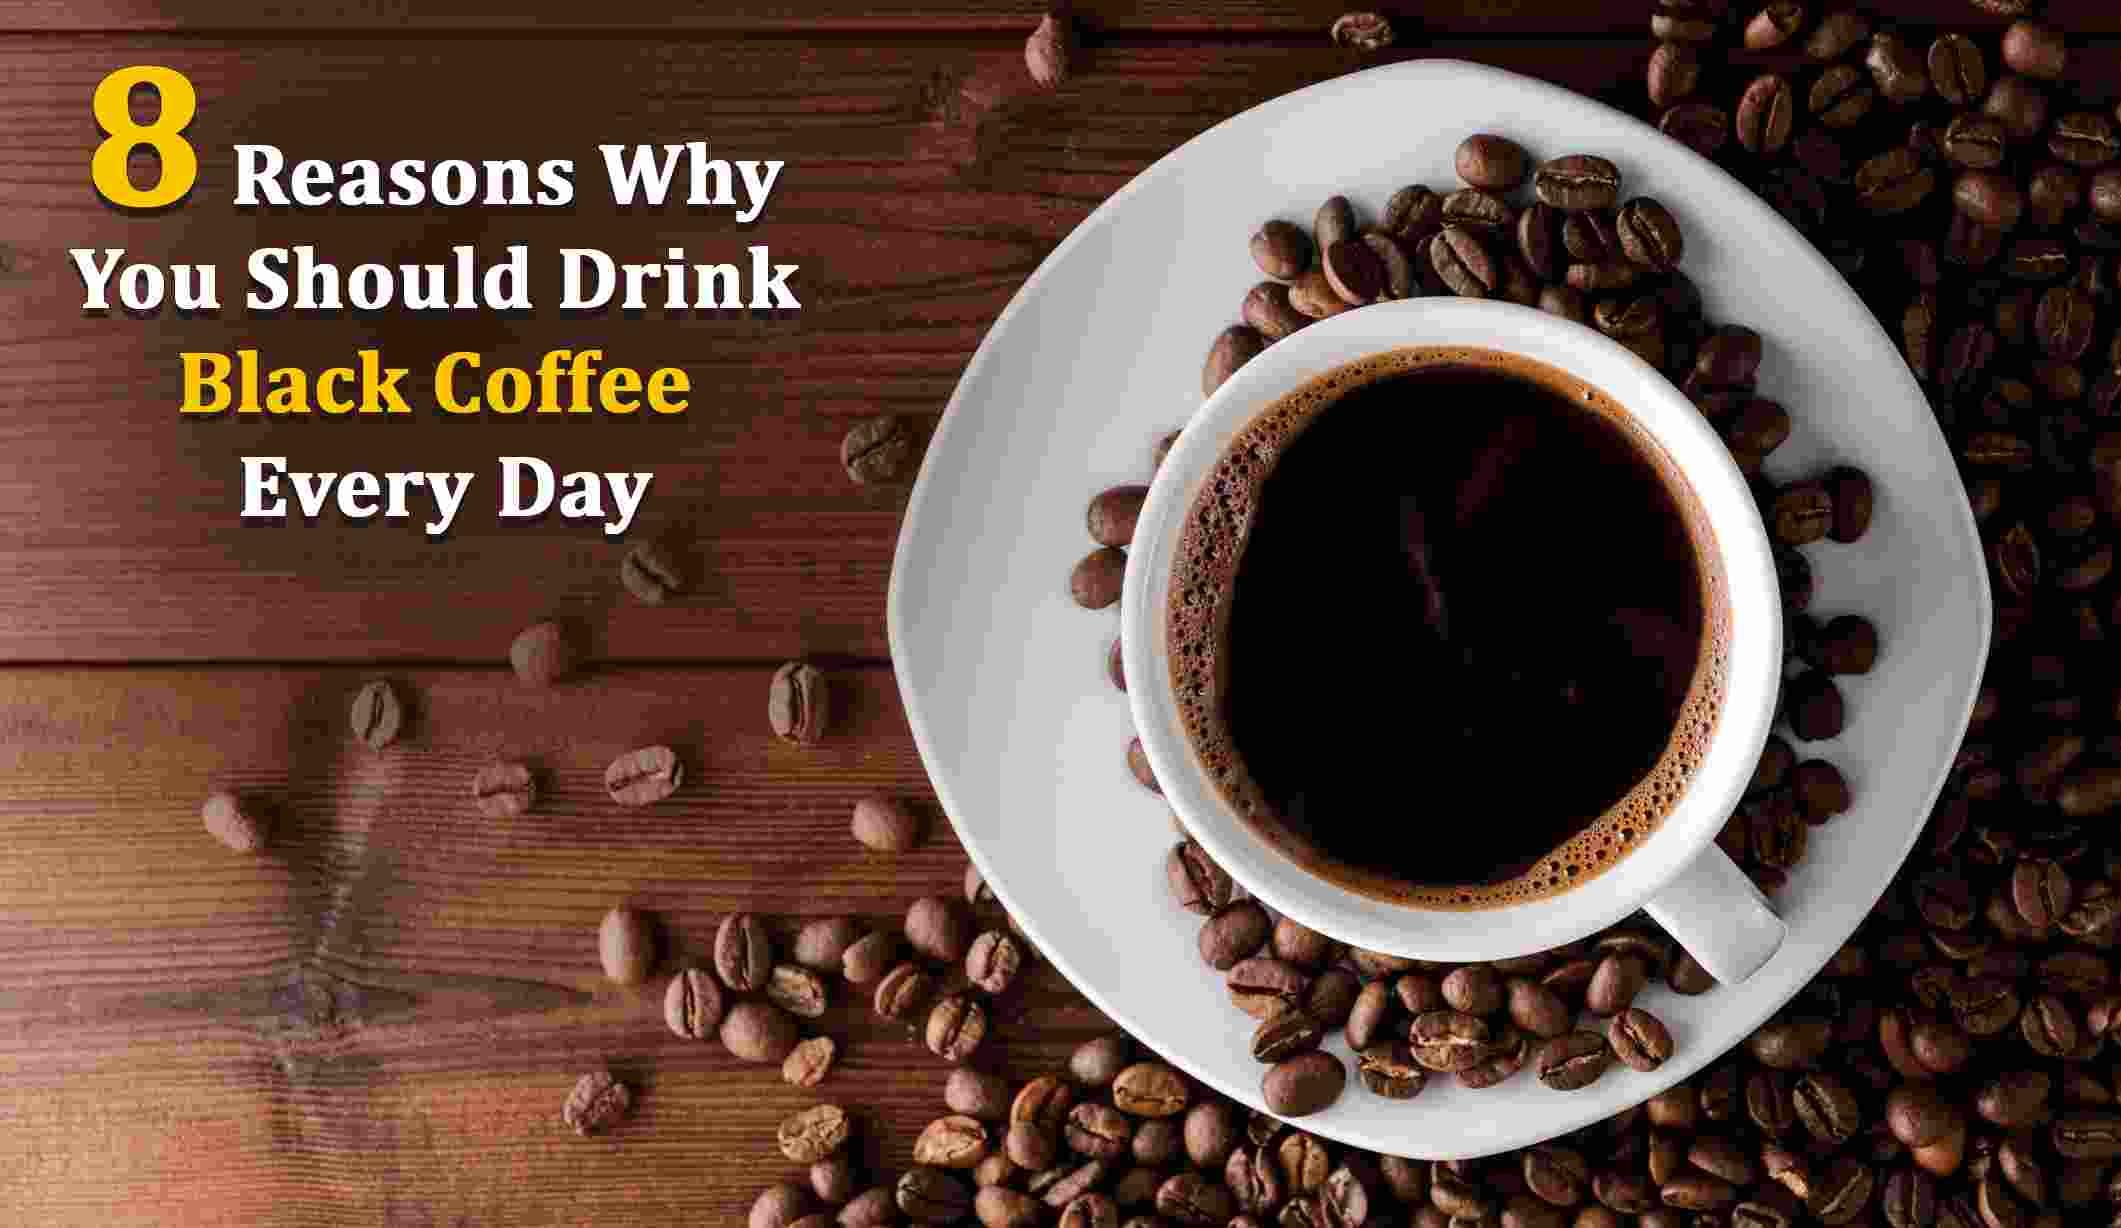 8 Reasons Why You Should Drink Black Coffee Every Day - ContentViral.com